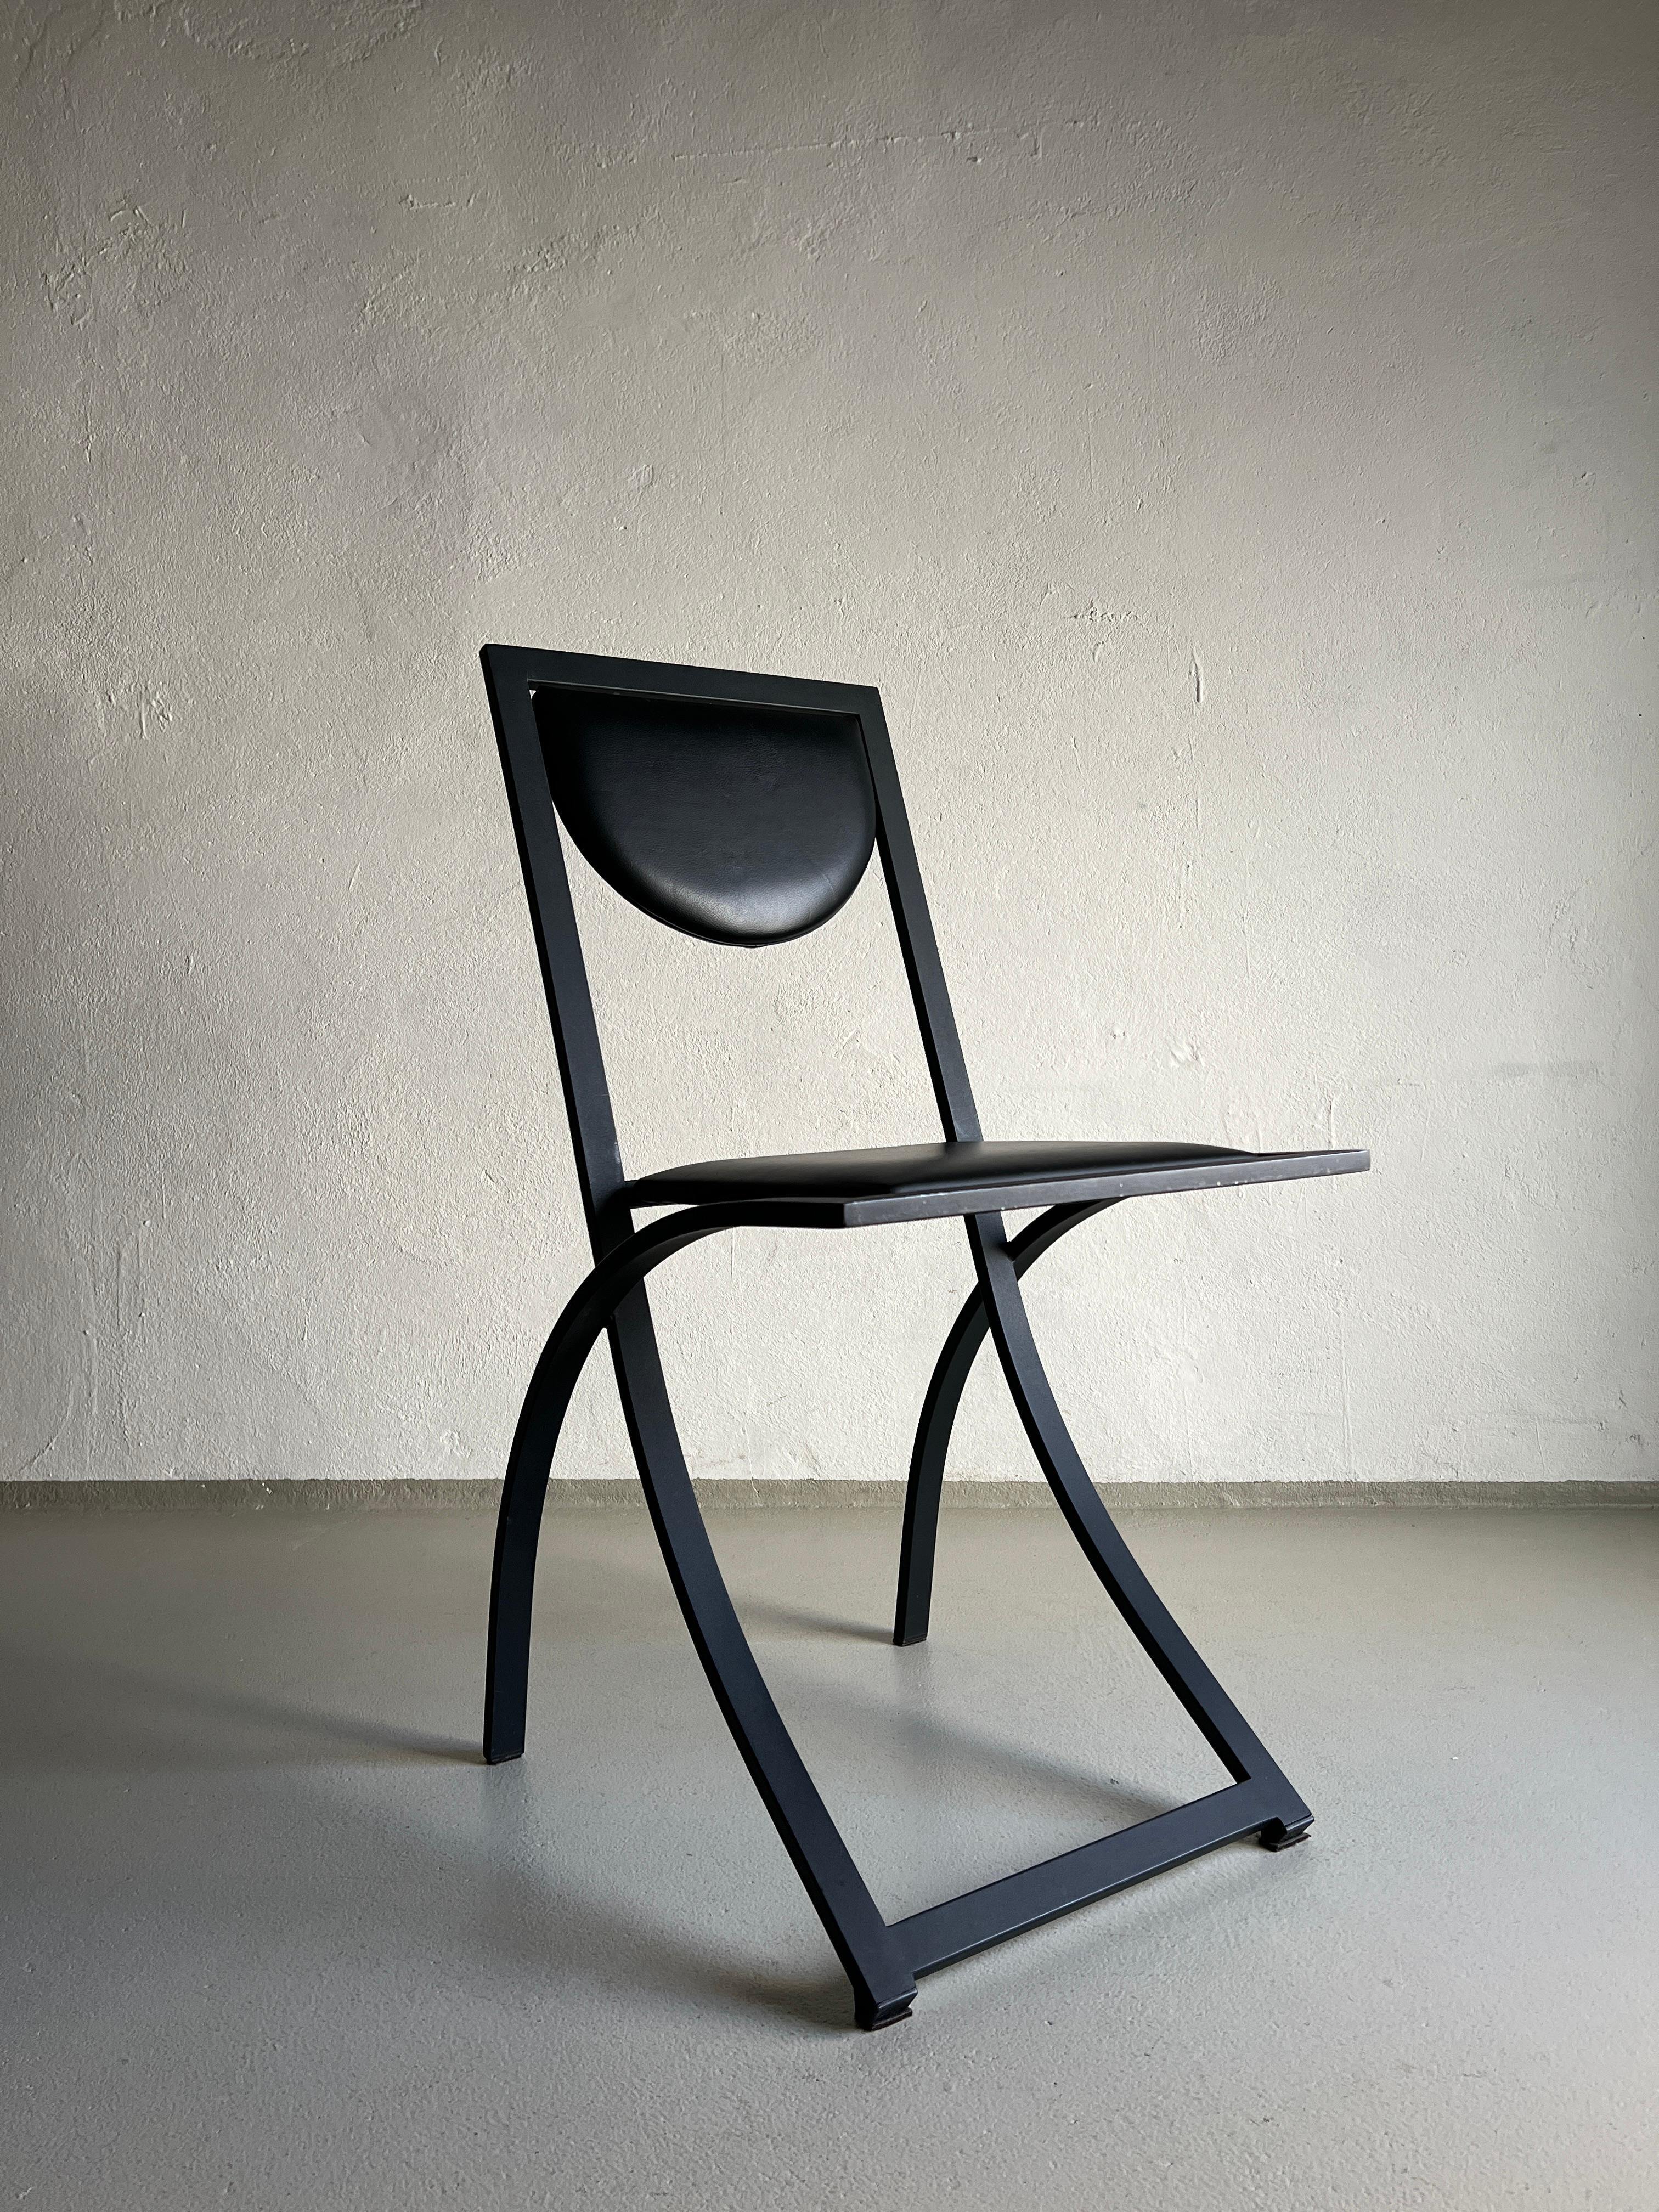 Cold-Painted Set of 4 Black Sinus Chairs by Karl Friedrich Förster, Germany 1990s For Sale